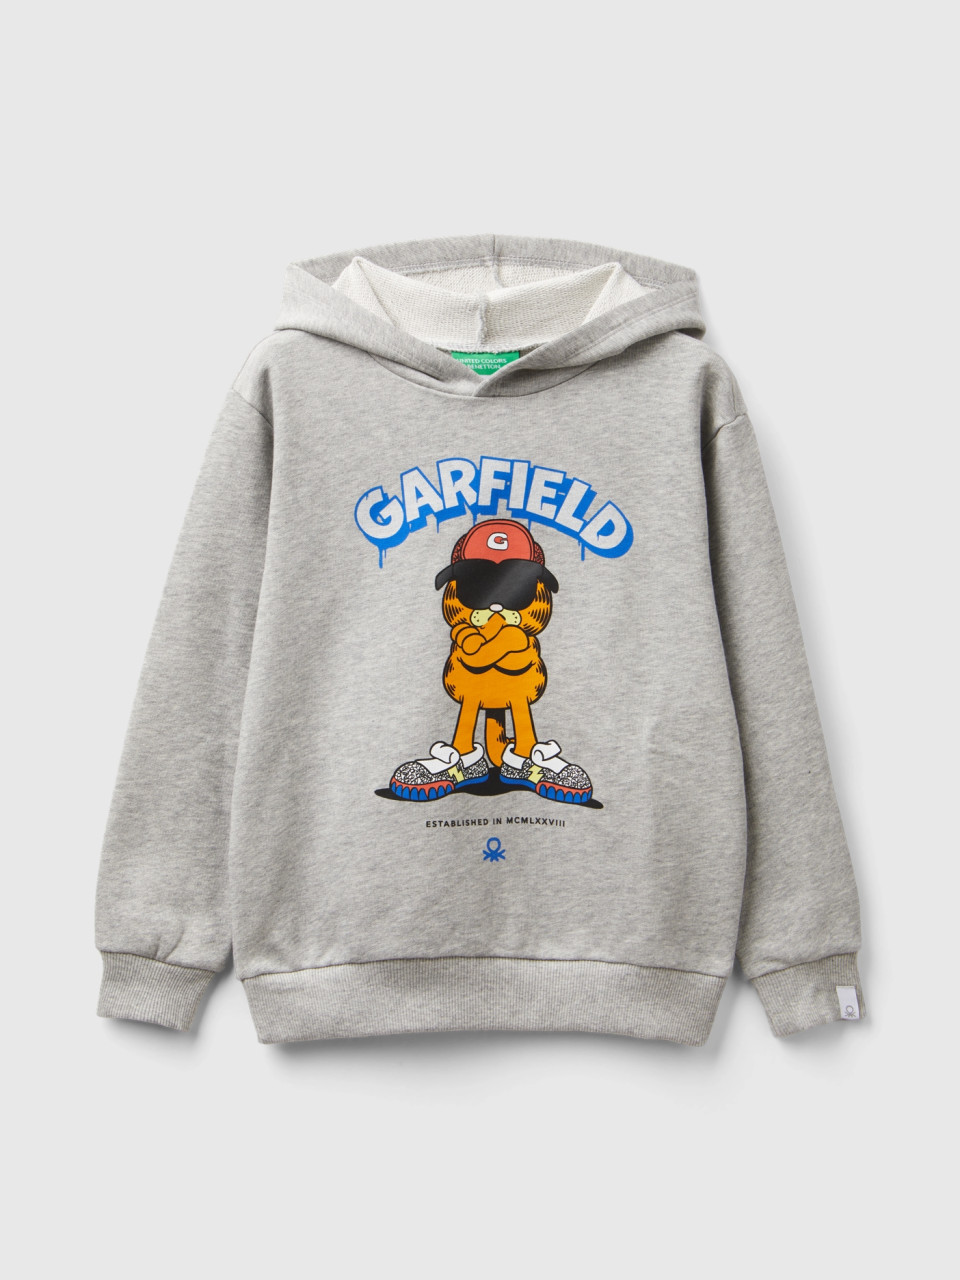 Benetton, Sweat Garfield ©2024 By Paws, taille M, Gris Clair